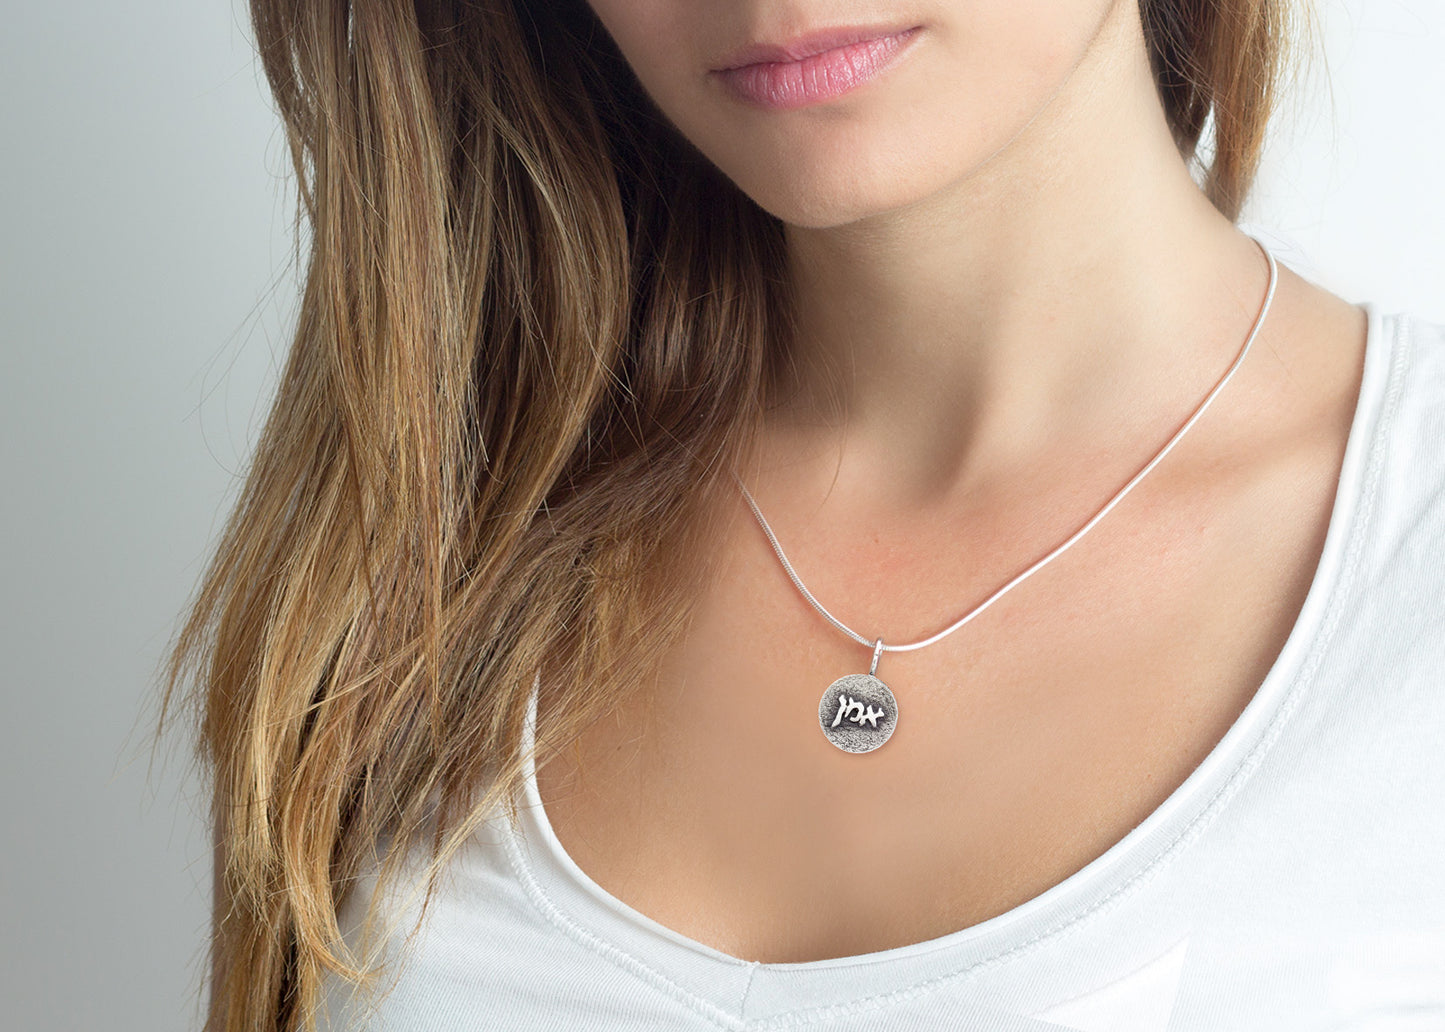 925 Sterling Pendant Silver With Amen in Hebrew